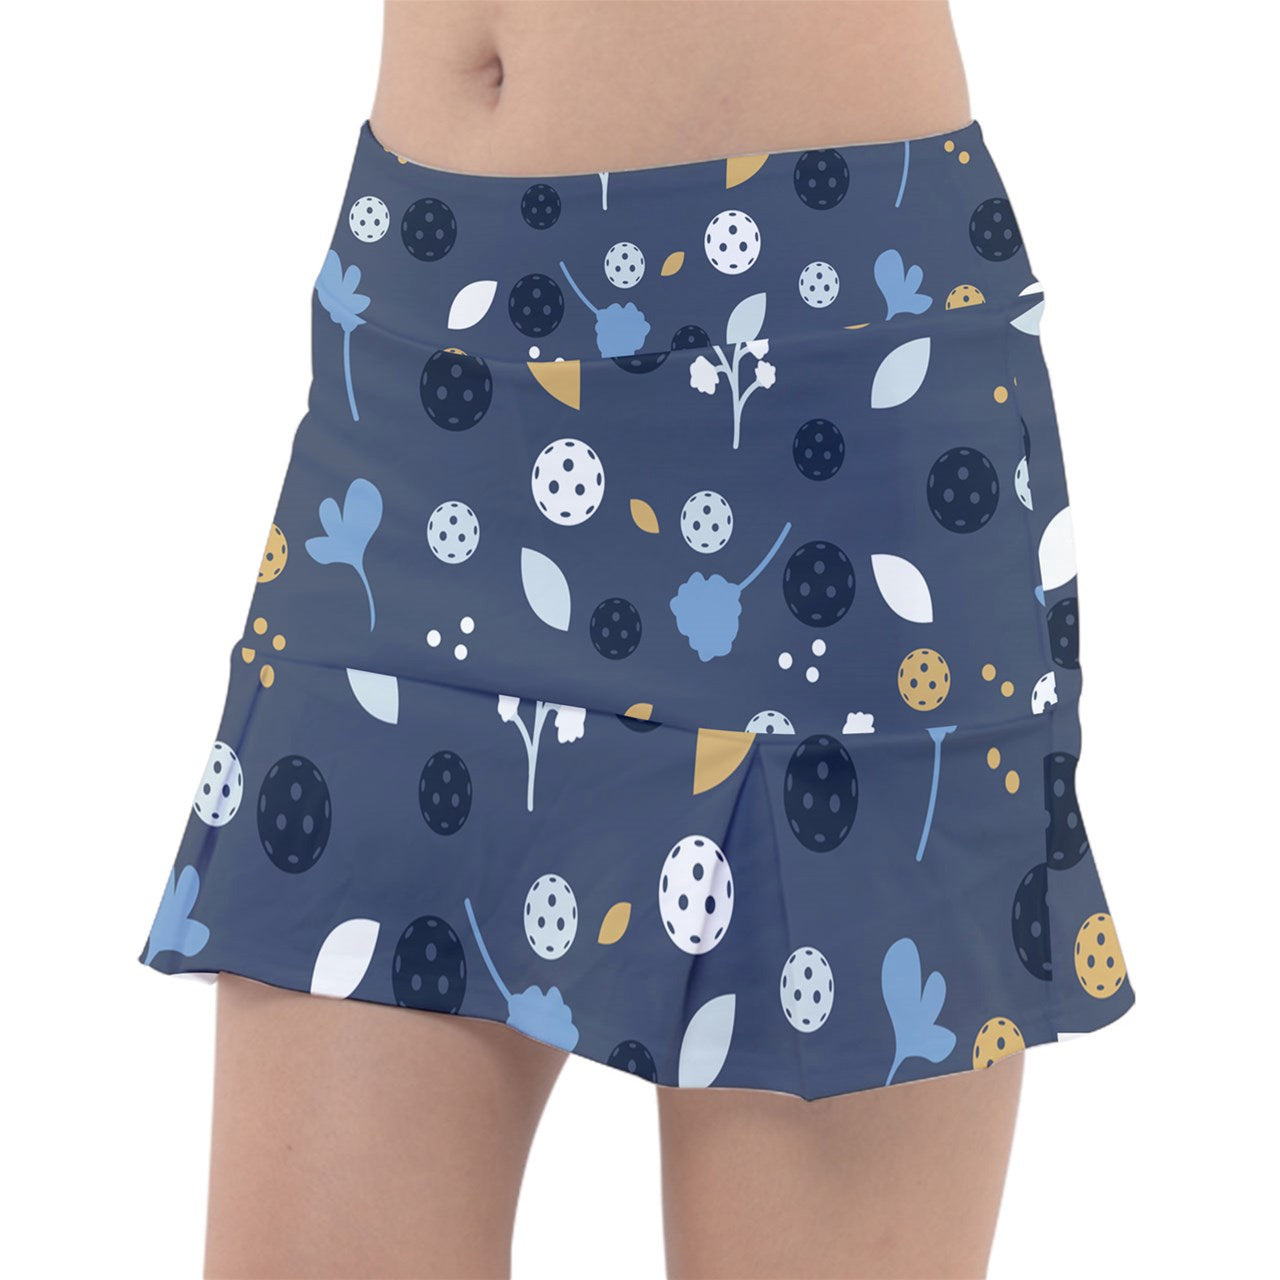 Dizzy Pickle Lesley Women's Pickleball Classic Pleated Skort Coordinating Patterned Inner Shorts Pockets Gray